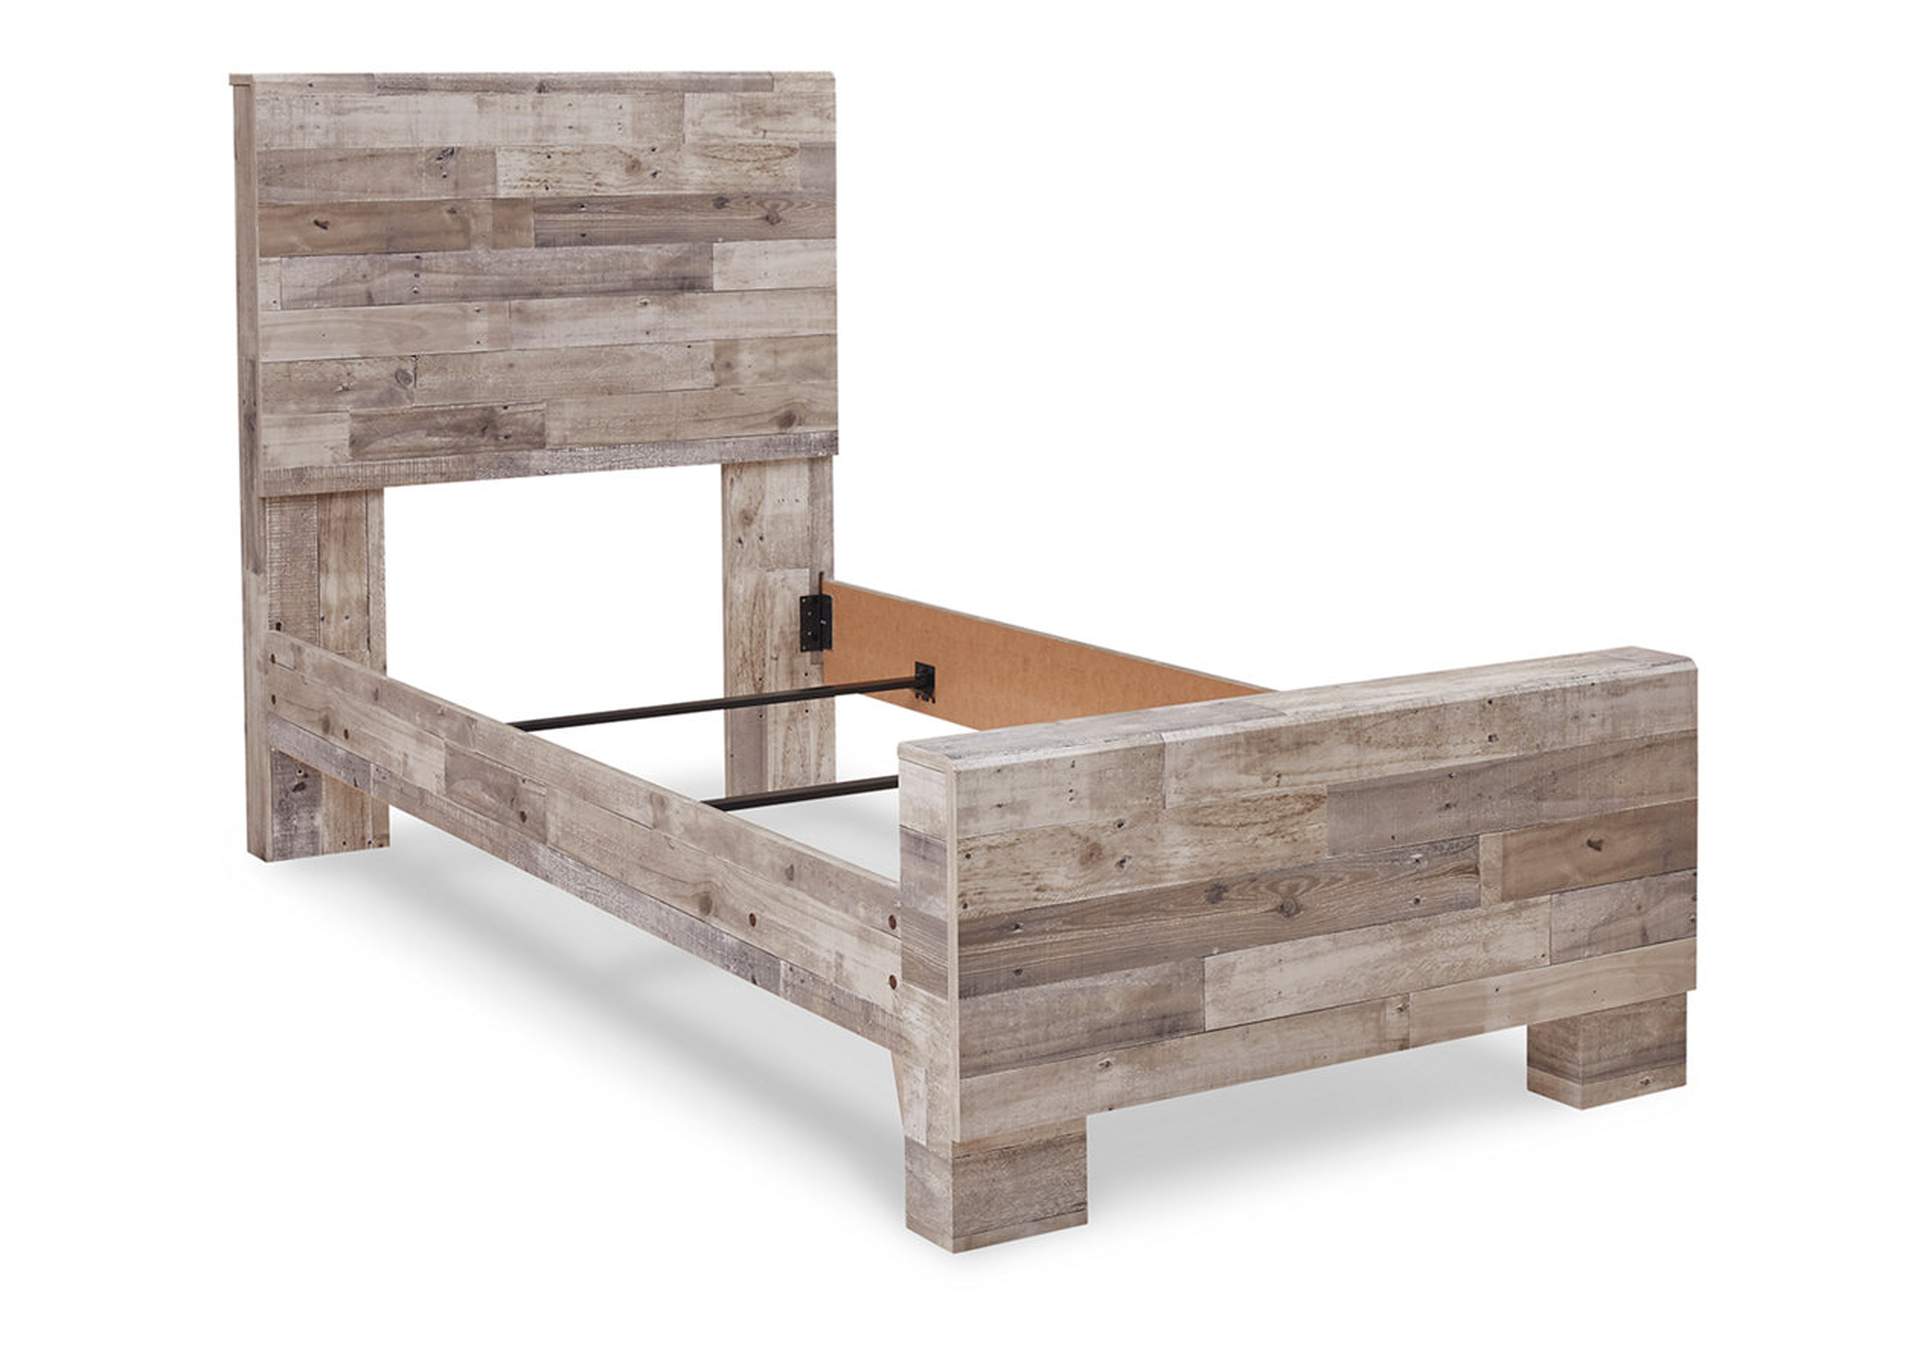 Effie Twin Panel Bed,Signature Design By Ashley